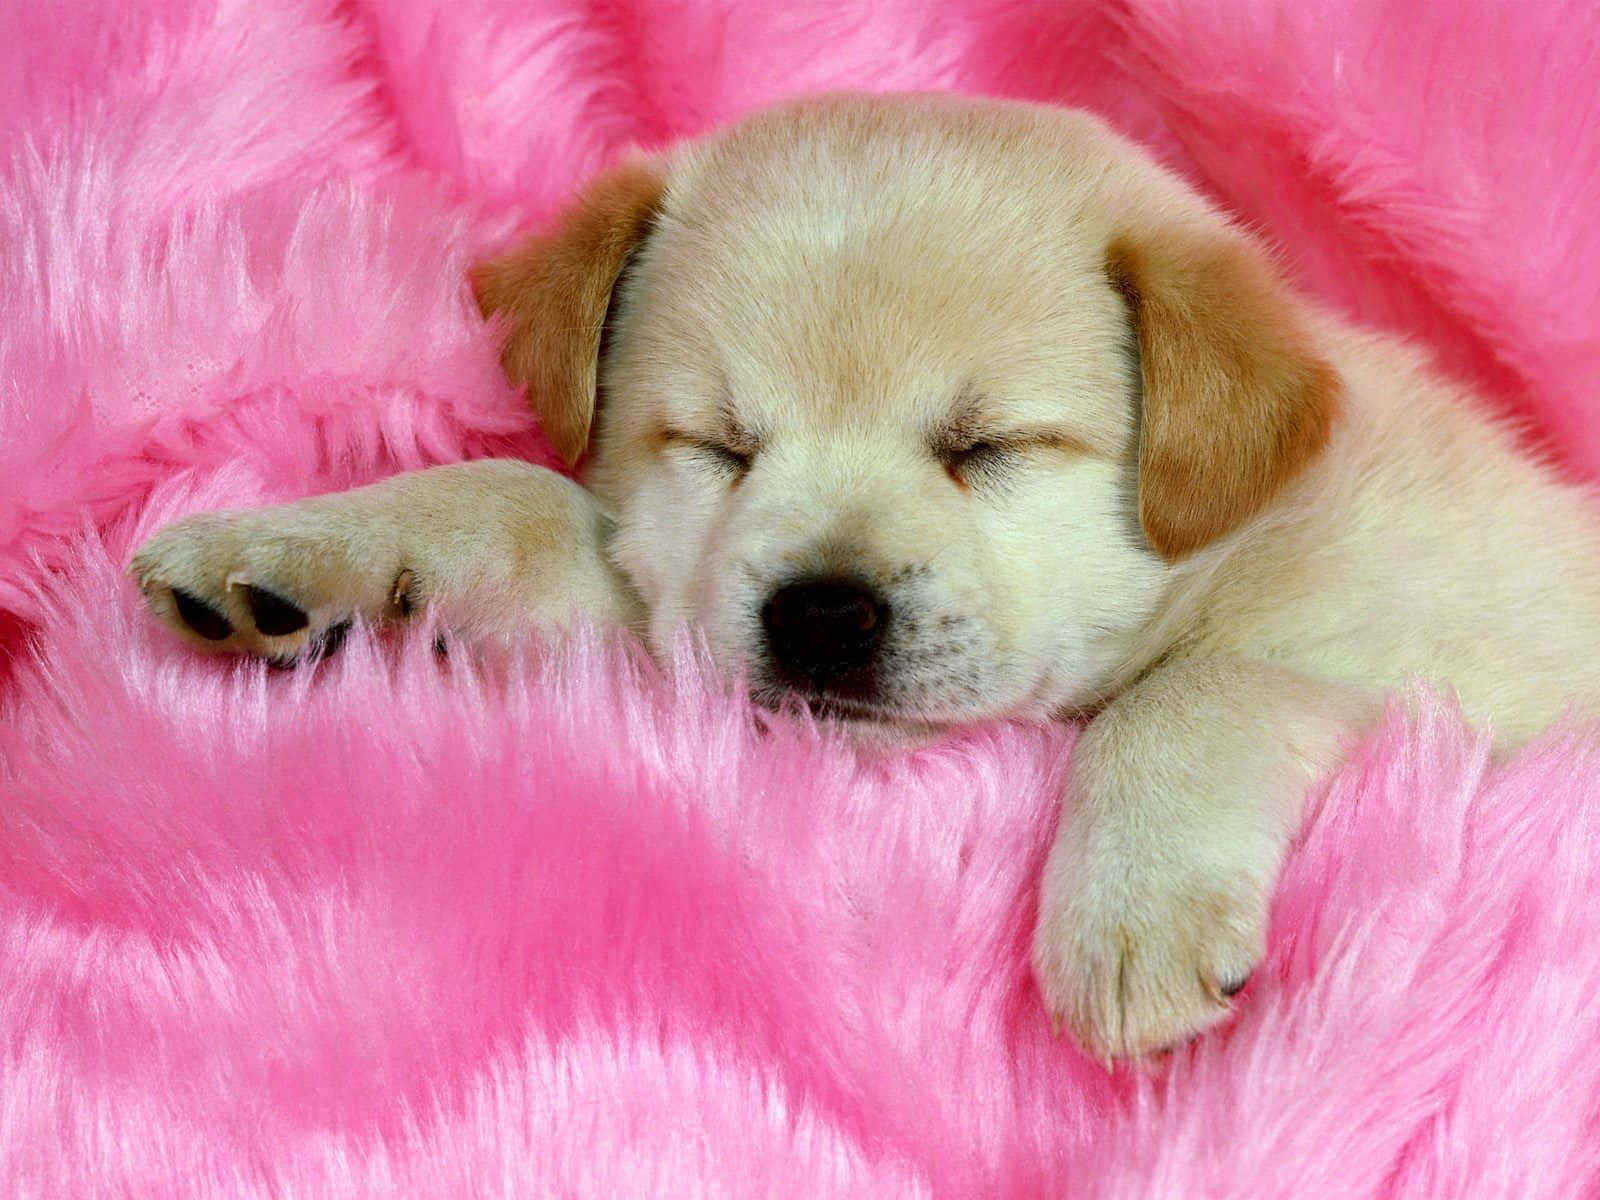 Snuggle Up With These Adorable Puppies